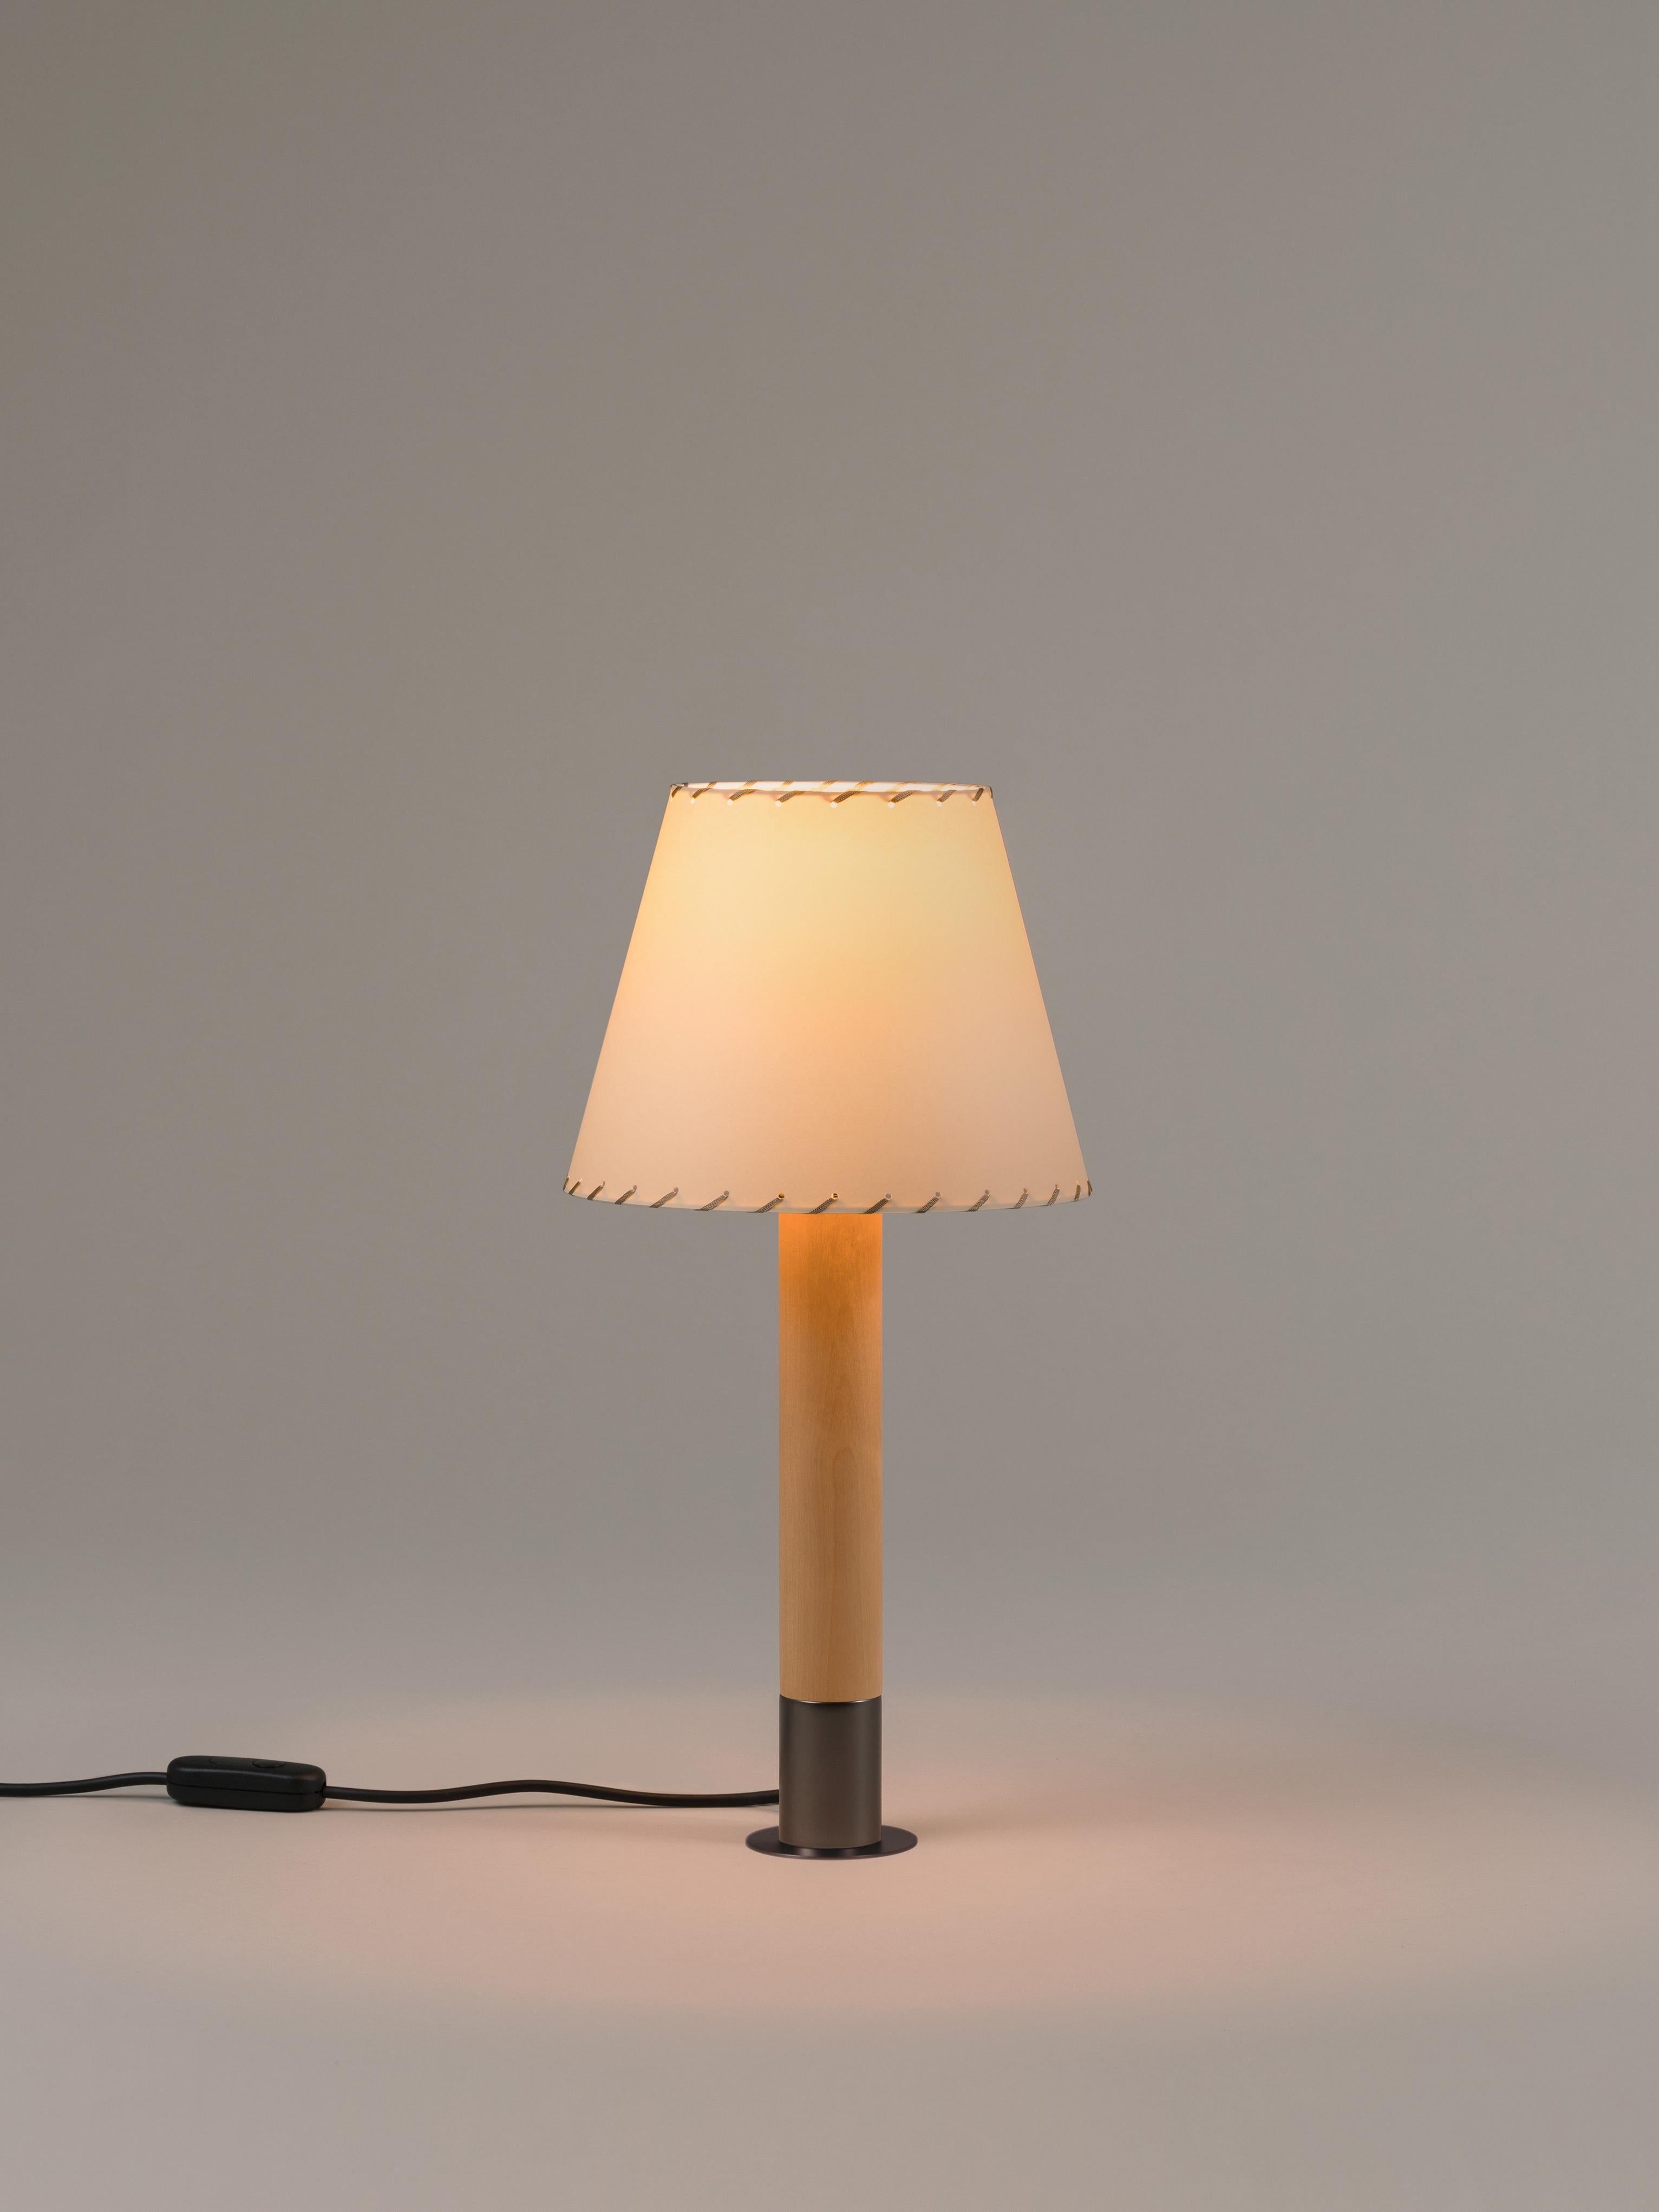 Bronze and Beige Básica M1 table lamp by Santiago Roqueta, Santa & Cole.
Dimensions: D 25 x H 52 cm
Materials: Bronze, birch wood, paperboard.
Available in other shade colors and with or without the stabilizing disc.
Available in nickel or